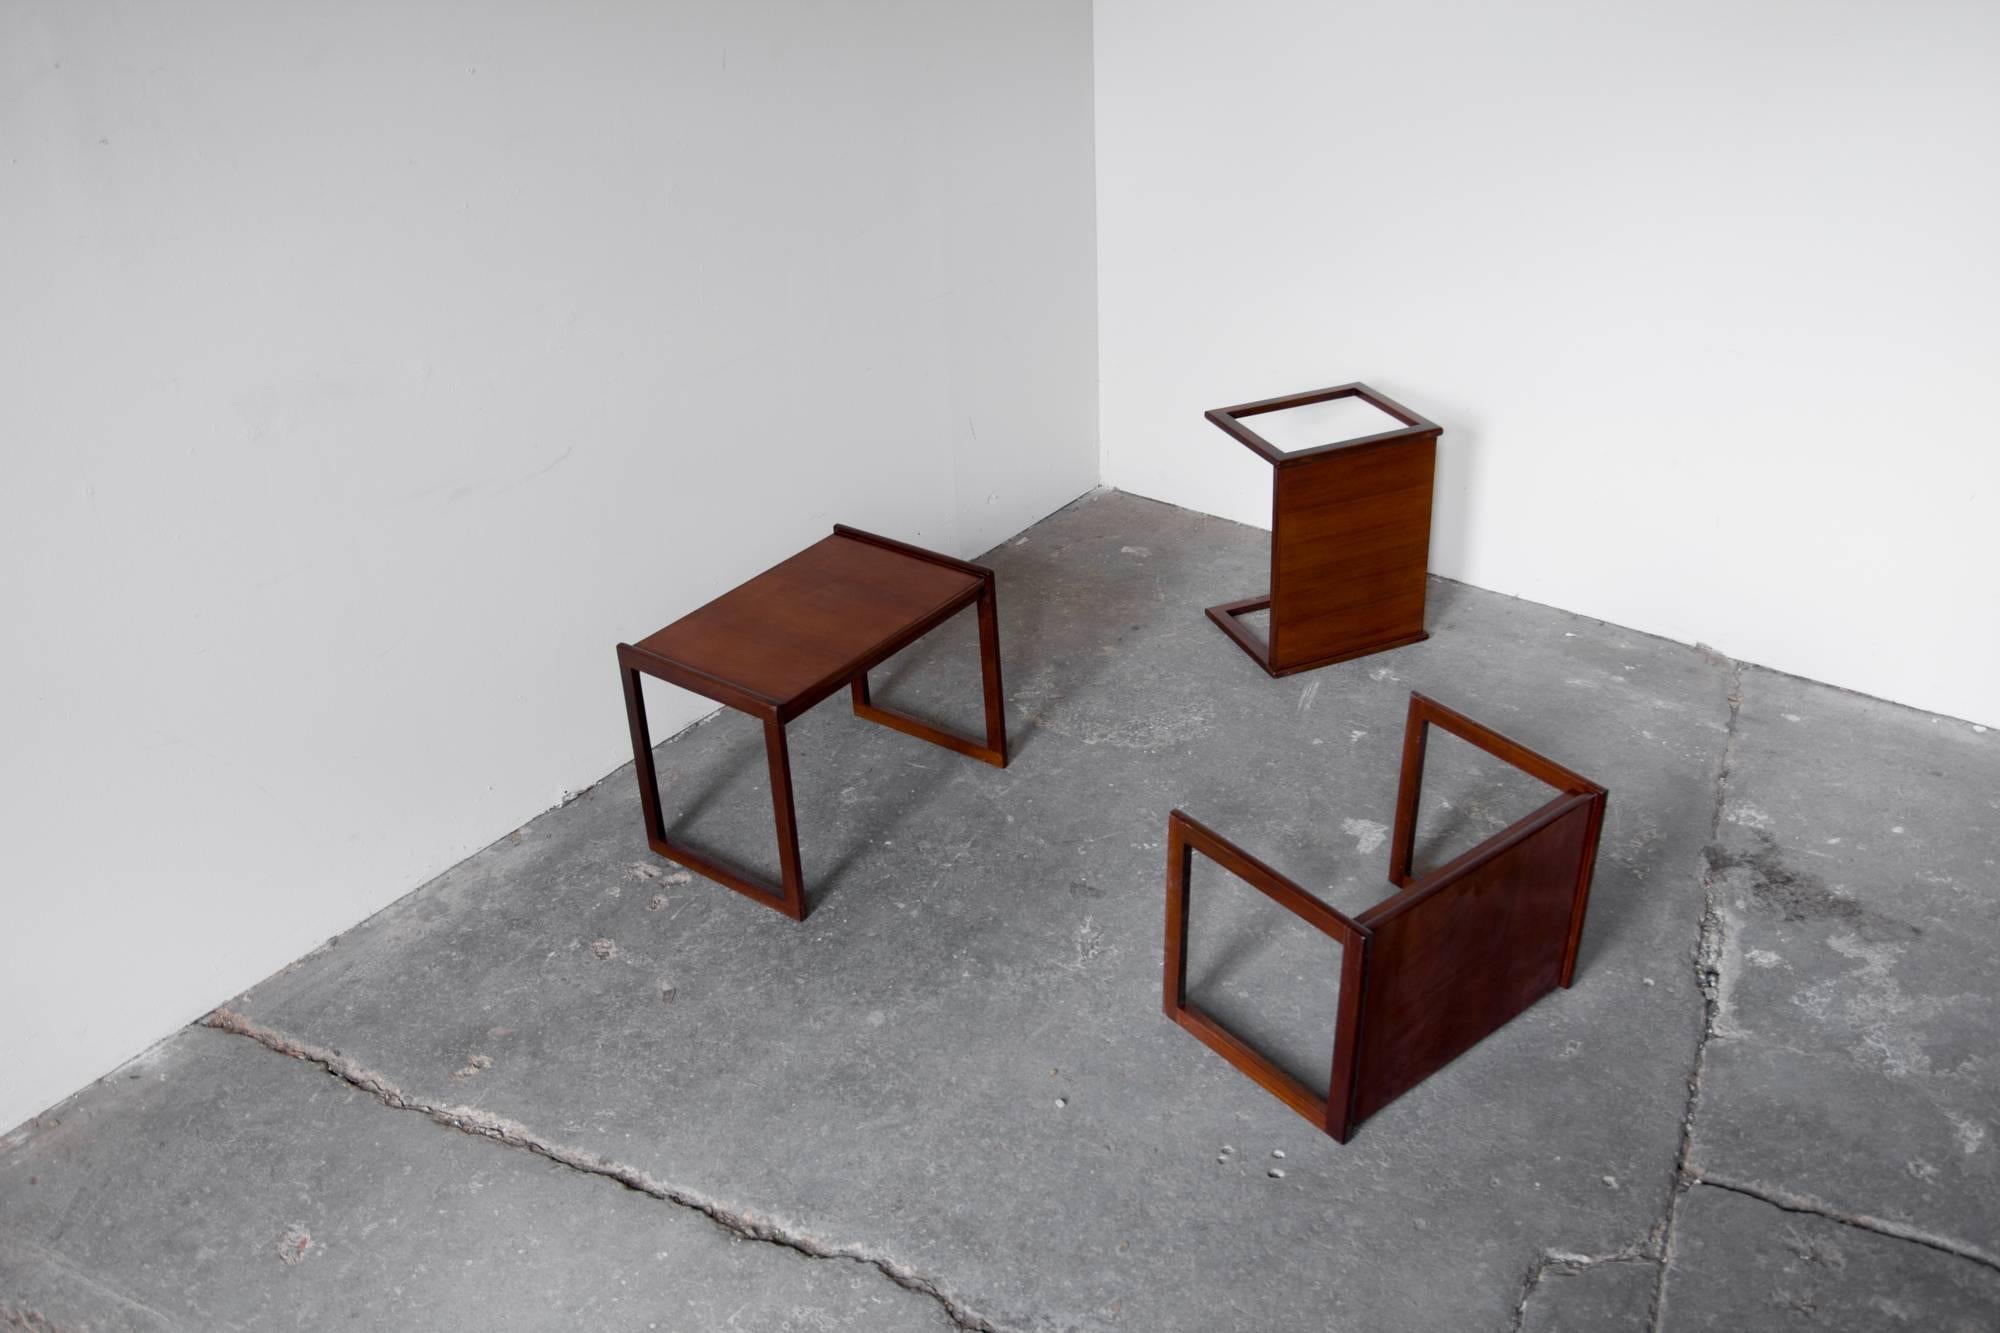 Set of three nesting tables by Punch Design Inc., rectangular sled legs rise slightly above the tabletop, forming a small lip, teak veneer wraps over the surface and around the edges.

Measures: Large 18